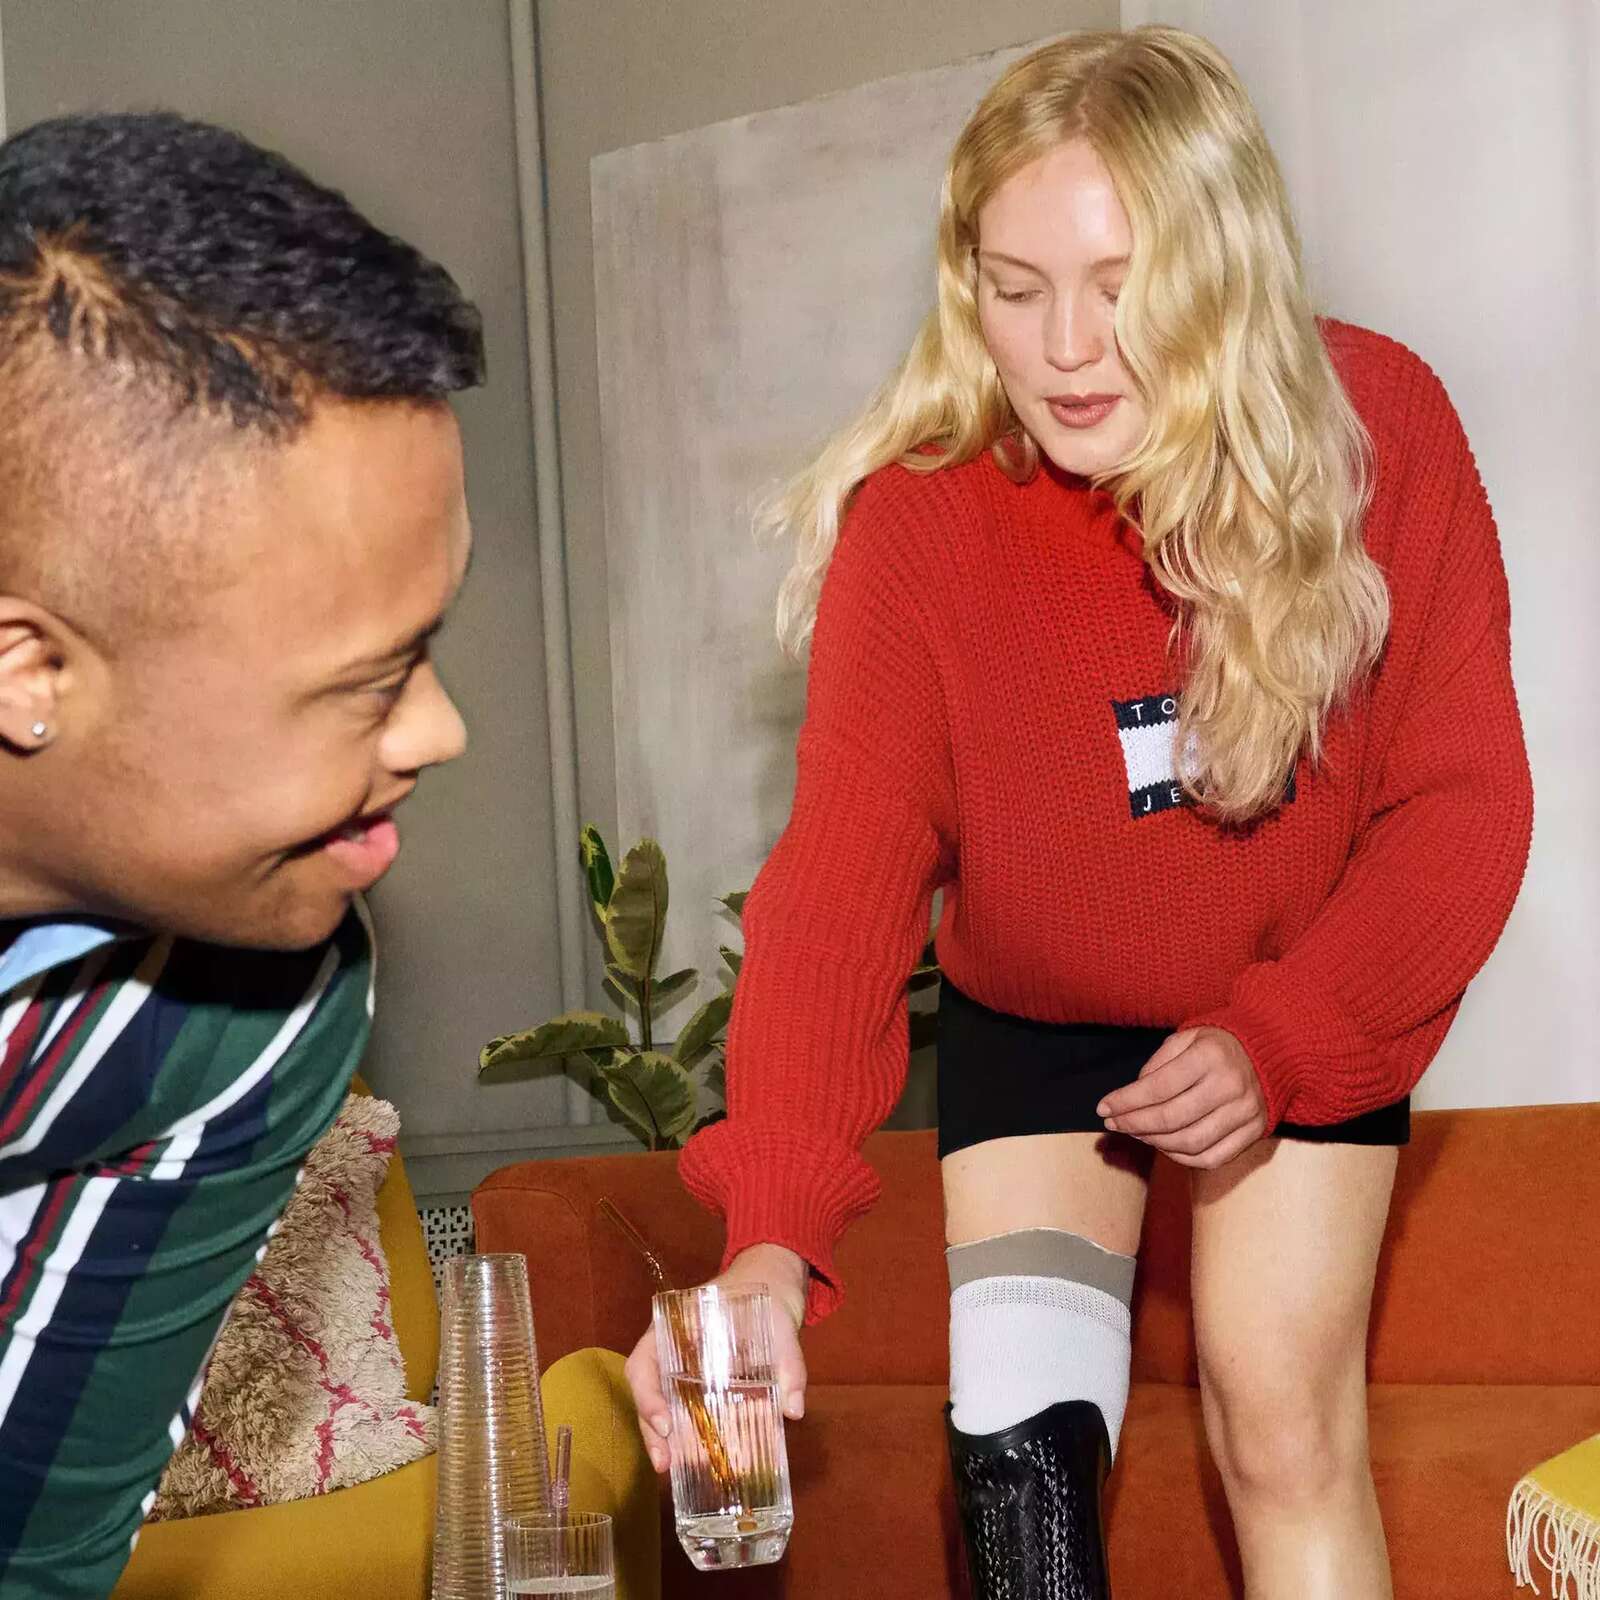 Image is of a blonde amputee leaning down putting a class on a table, a man with Down Syndrome is closer in the frame, he has brown hair and features. The two are hanging out together.